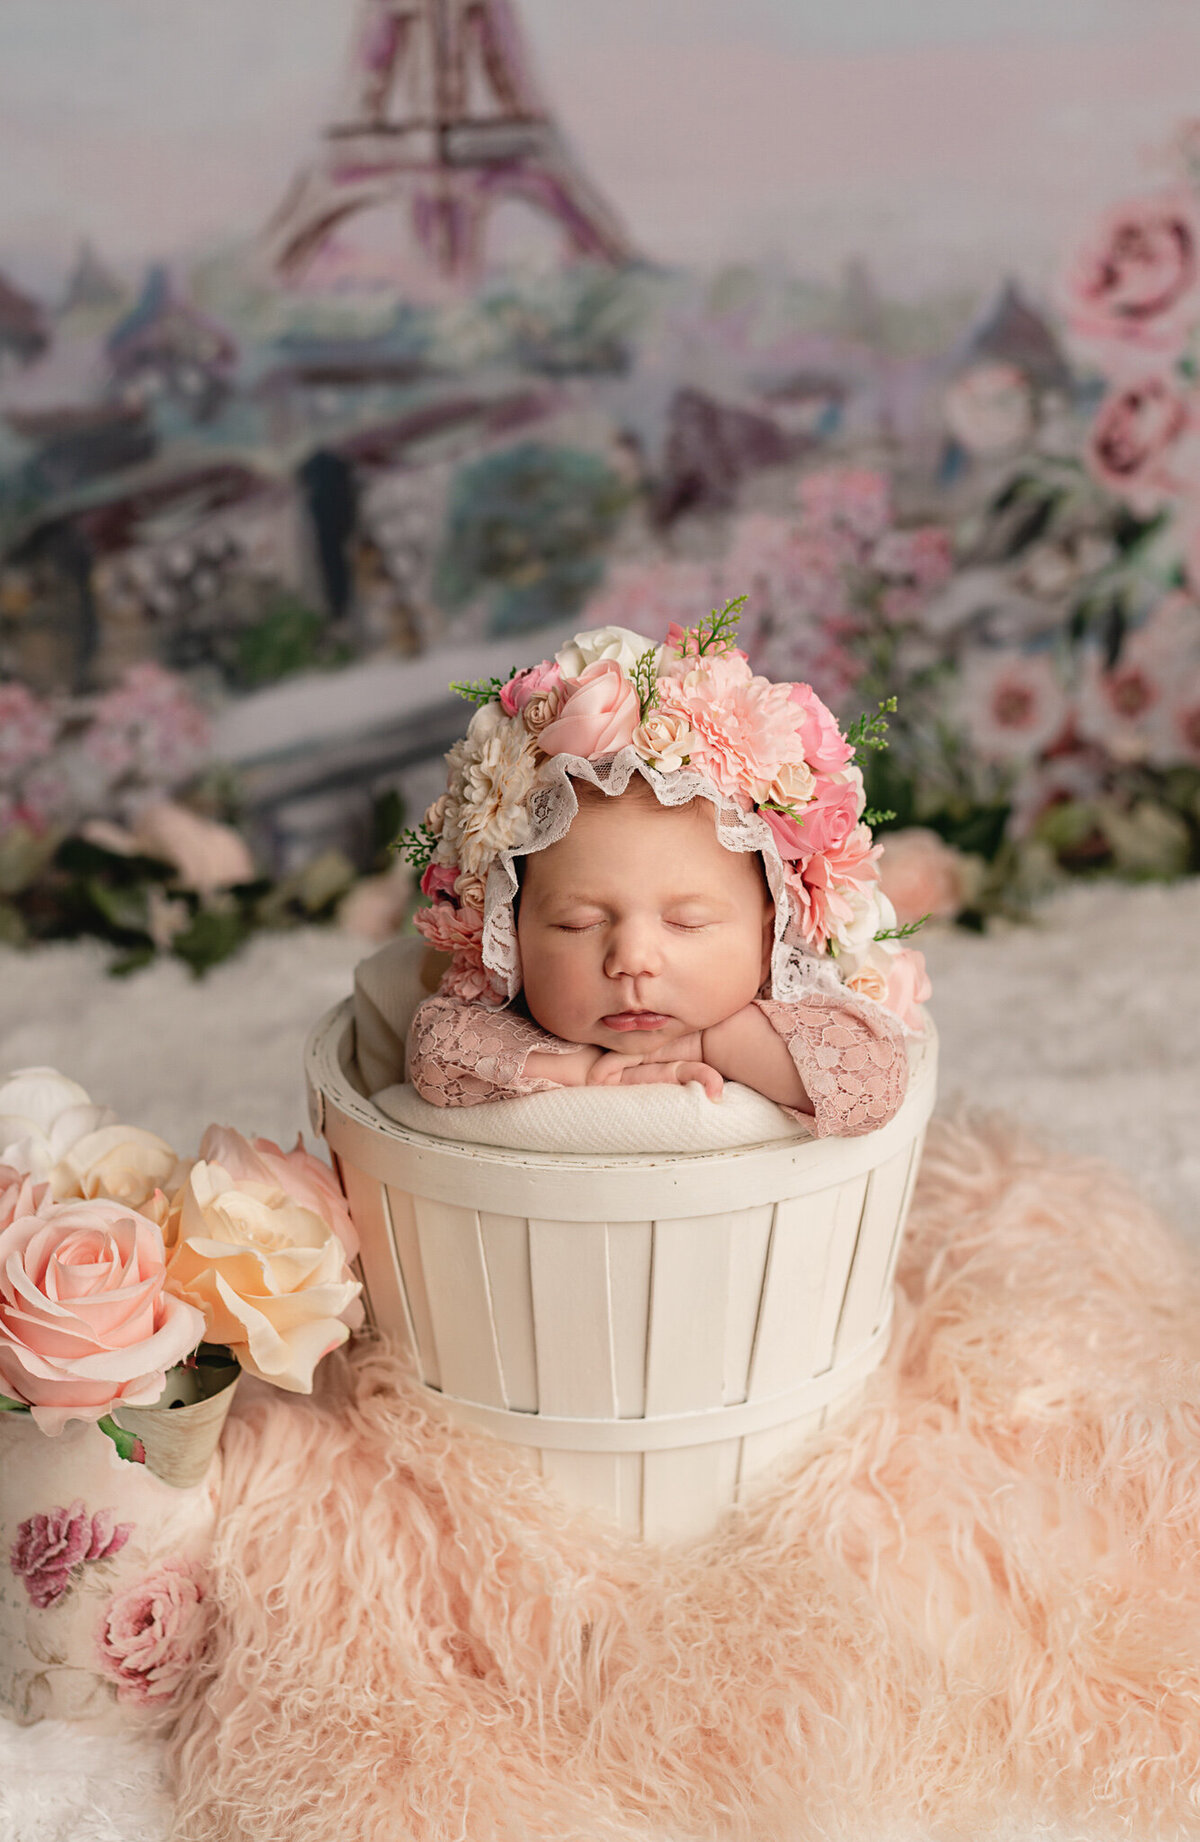 Newborn Photo of baby in a white bucket wearing a floral bonnet with Paris theme setup, studio in Greater Toronto area.